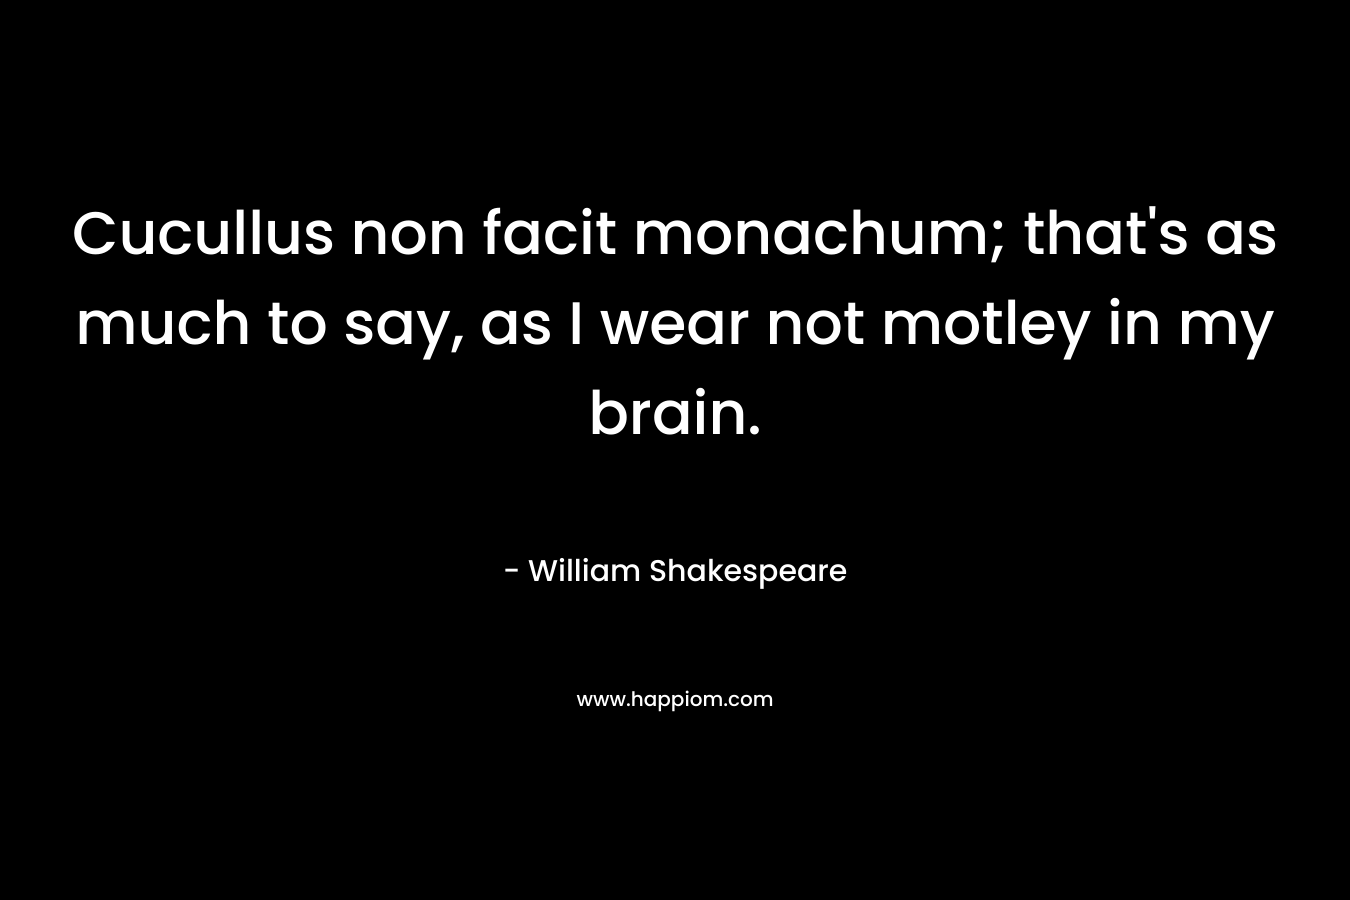 Cucullus non facit monachum; that’s as much to say, as I wear not motley in my brain. – William Shakespeare